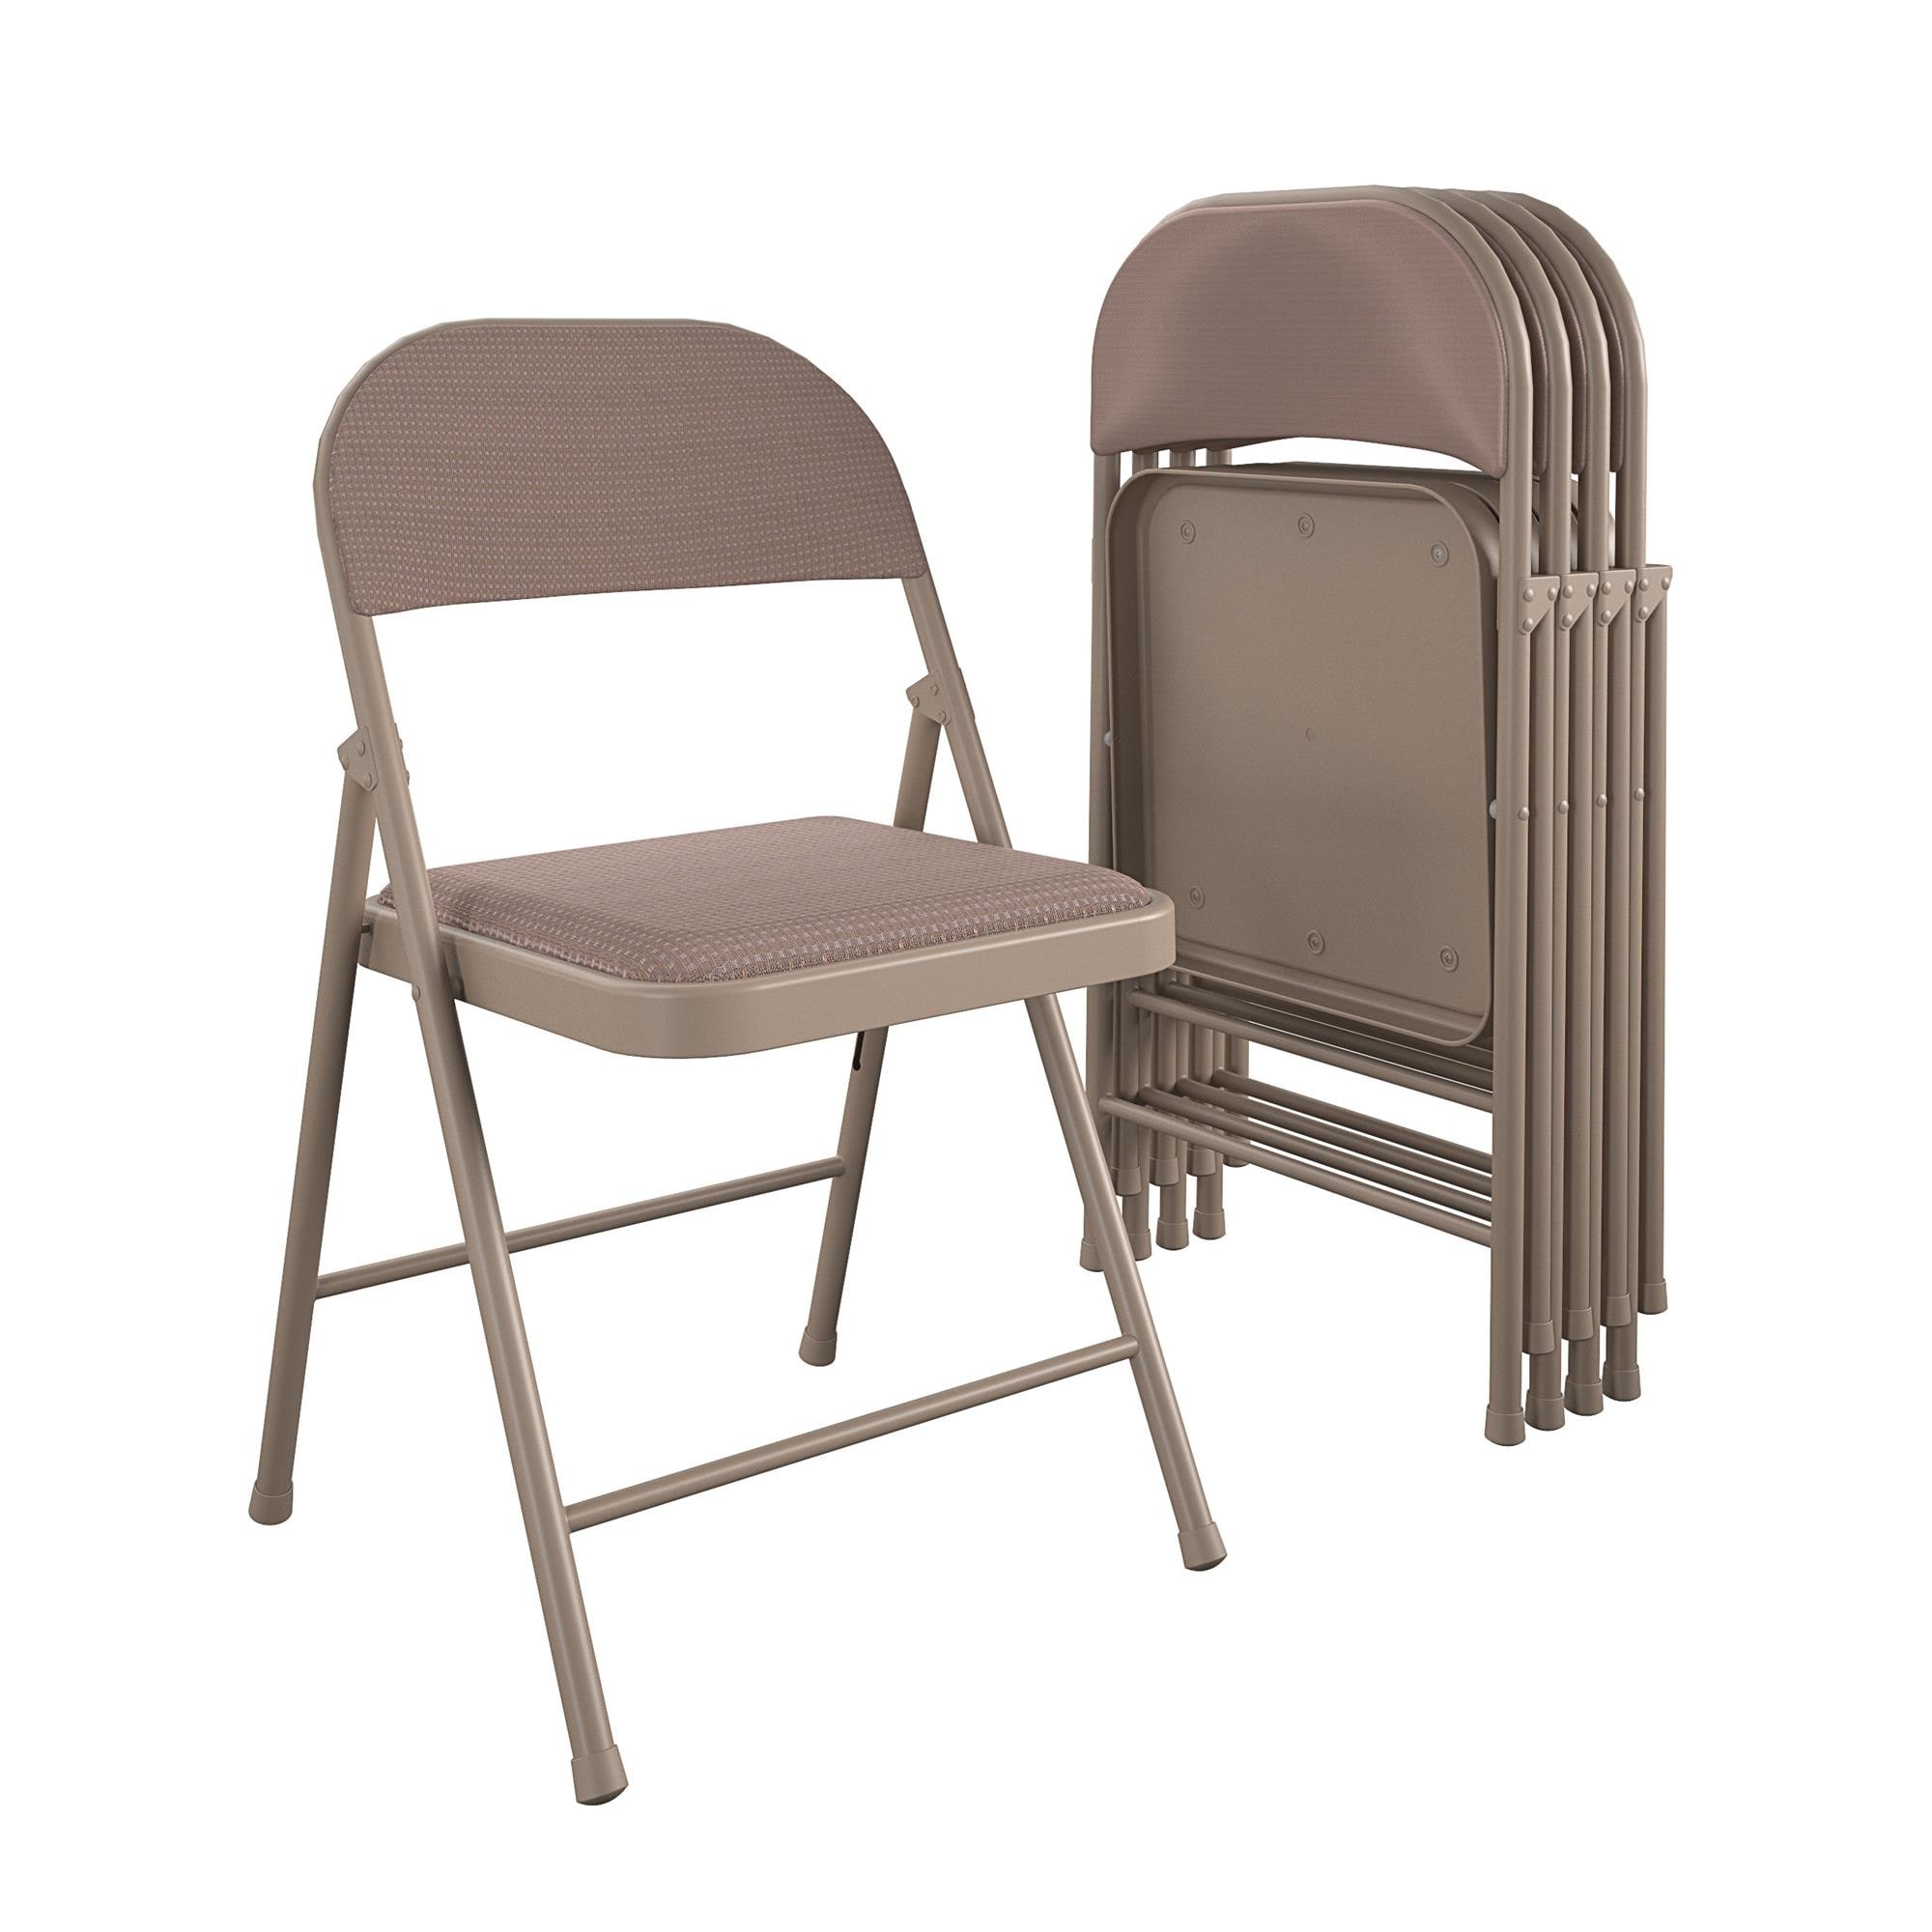 https://ak1.ostkcdn.com/images/products/is/images/direct/f50ded4bb1bc86f7a43f439bd23197ac22d93ffb/COSCO-SmartFold%E2%84%A2-Fabric-Folding-Chair%2C-4-Pack.jpg